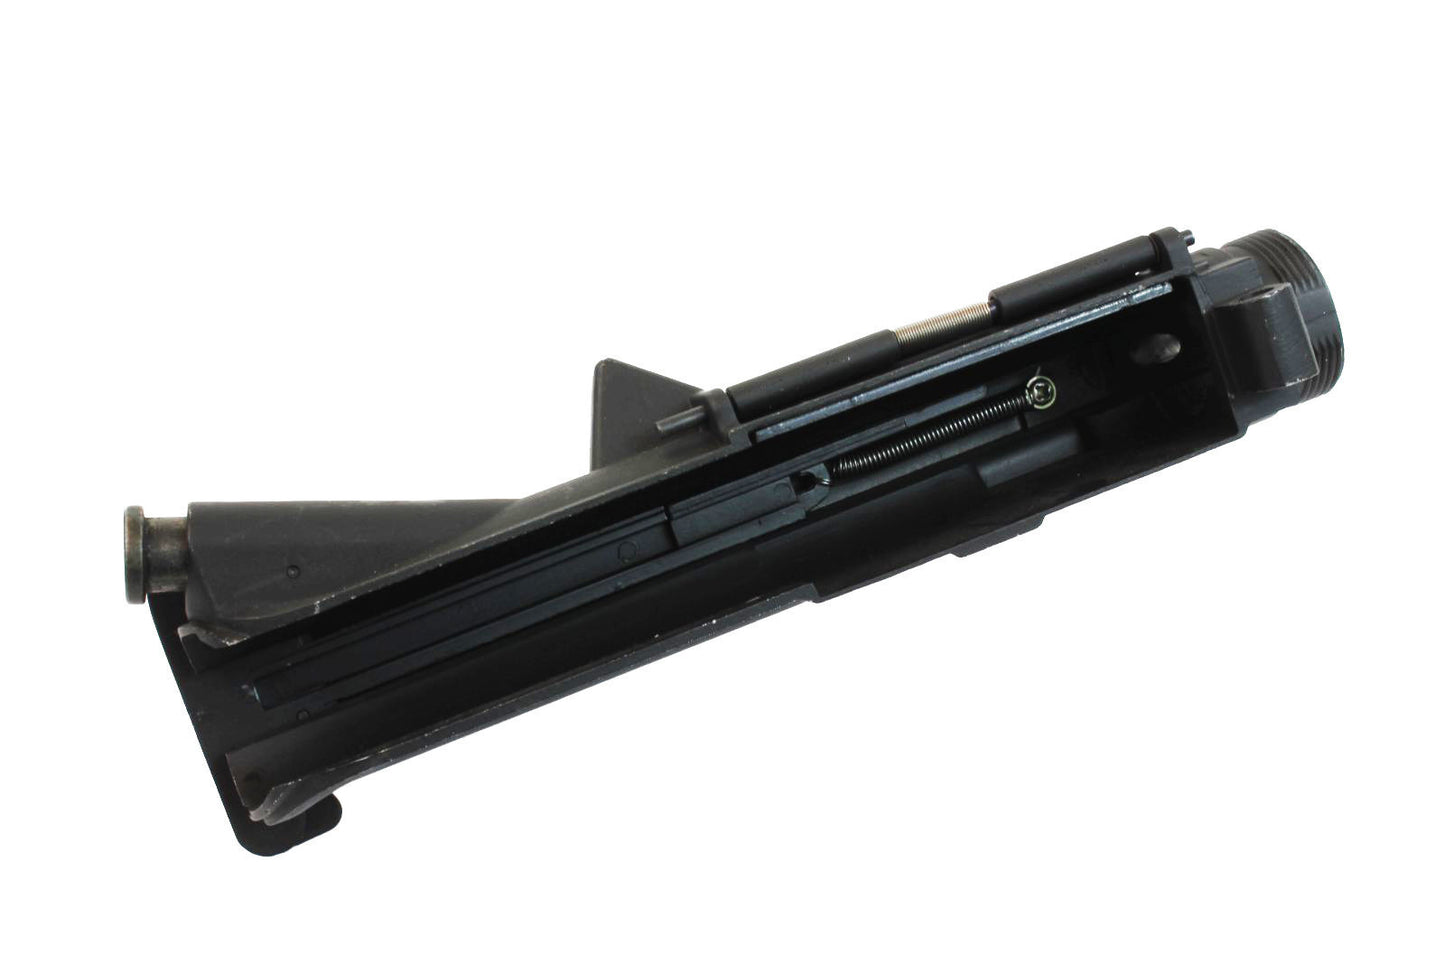 Full Metal M4 AEG Upper Receiver Replacement w/ Charging Handle Assembly Pre-Installed